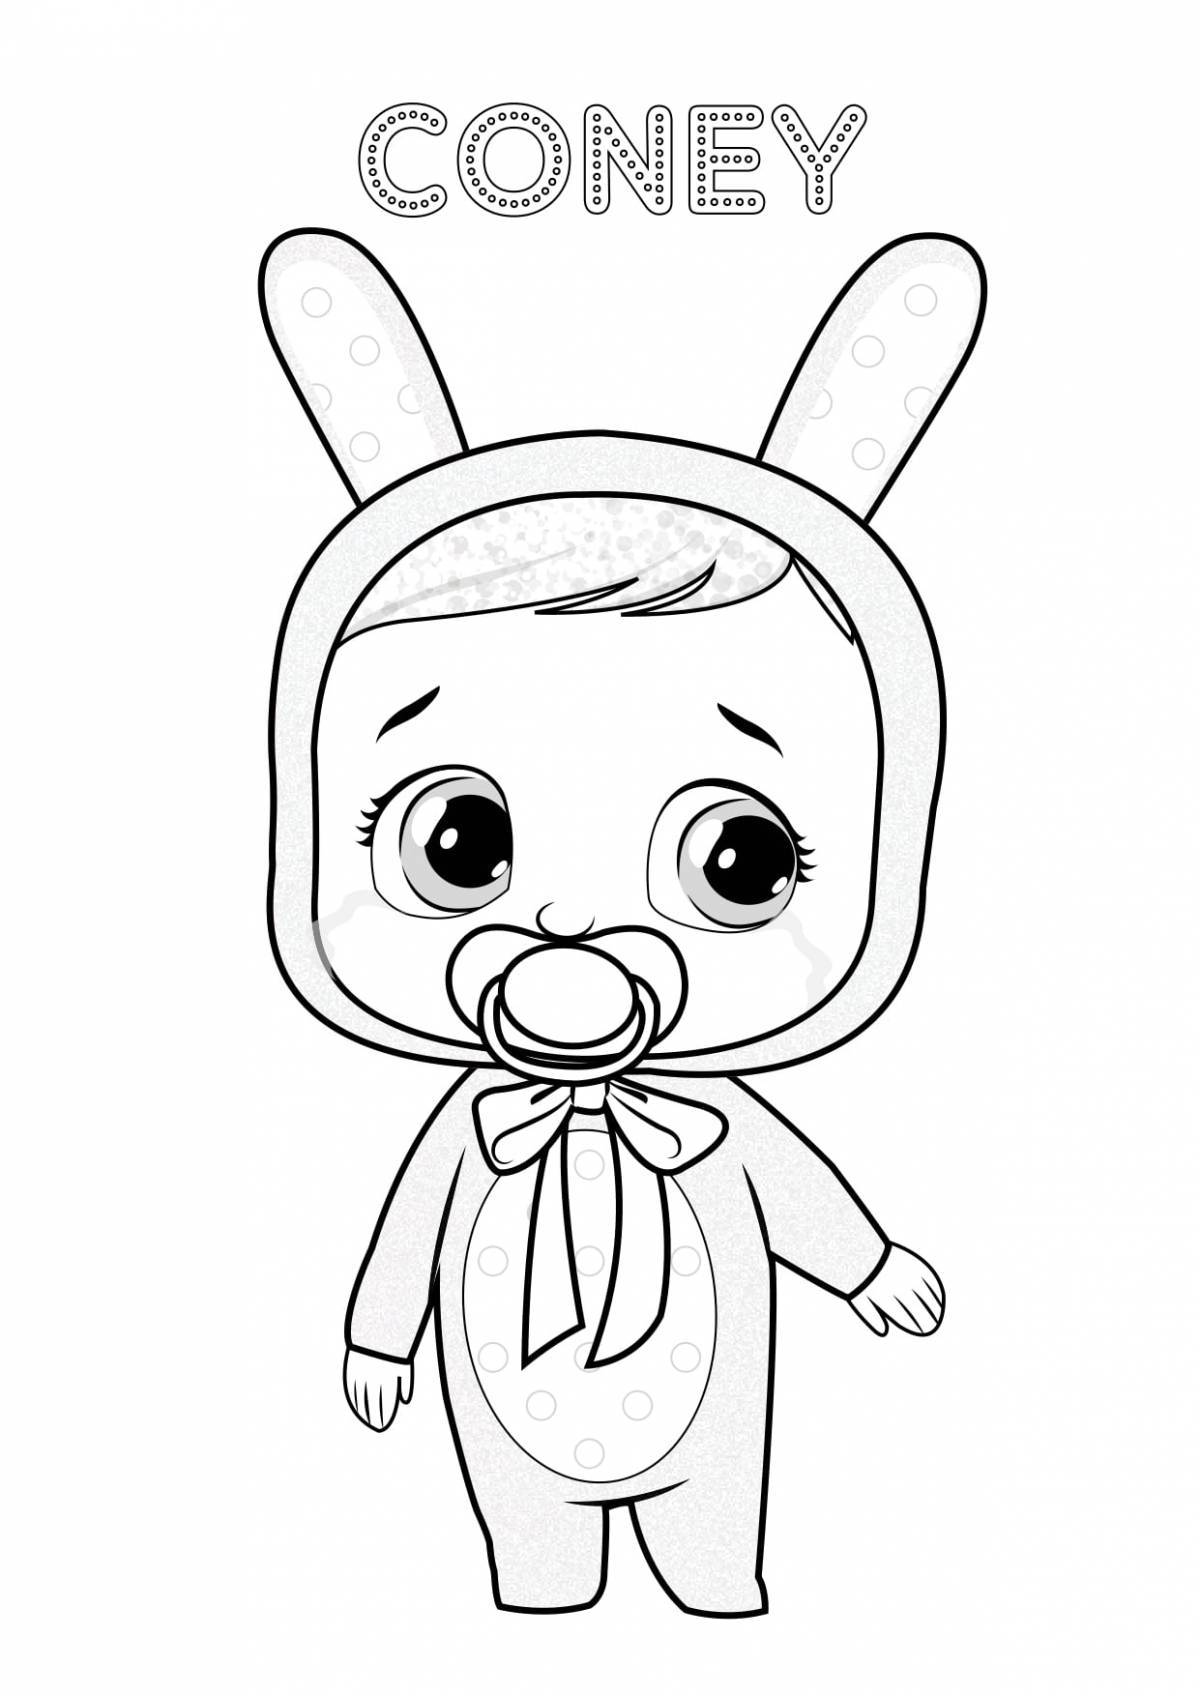 Cute edge baby coloring page